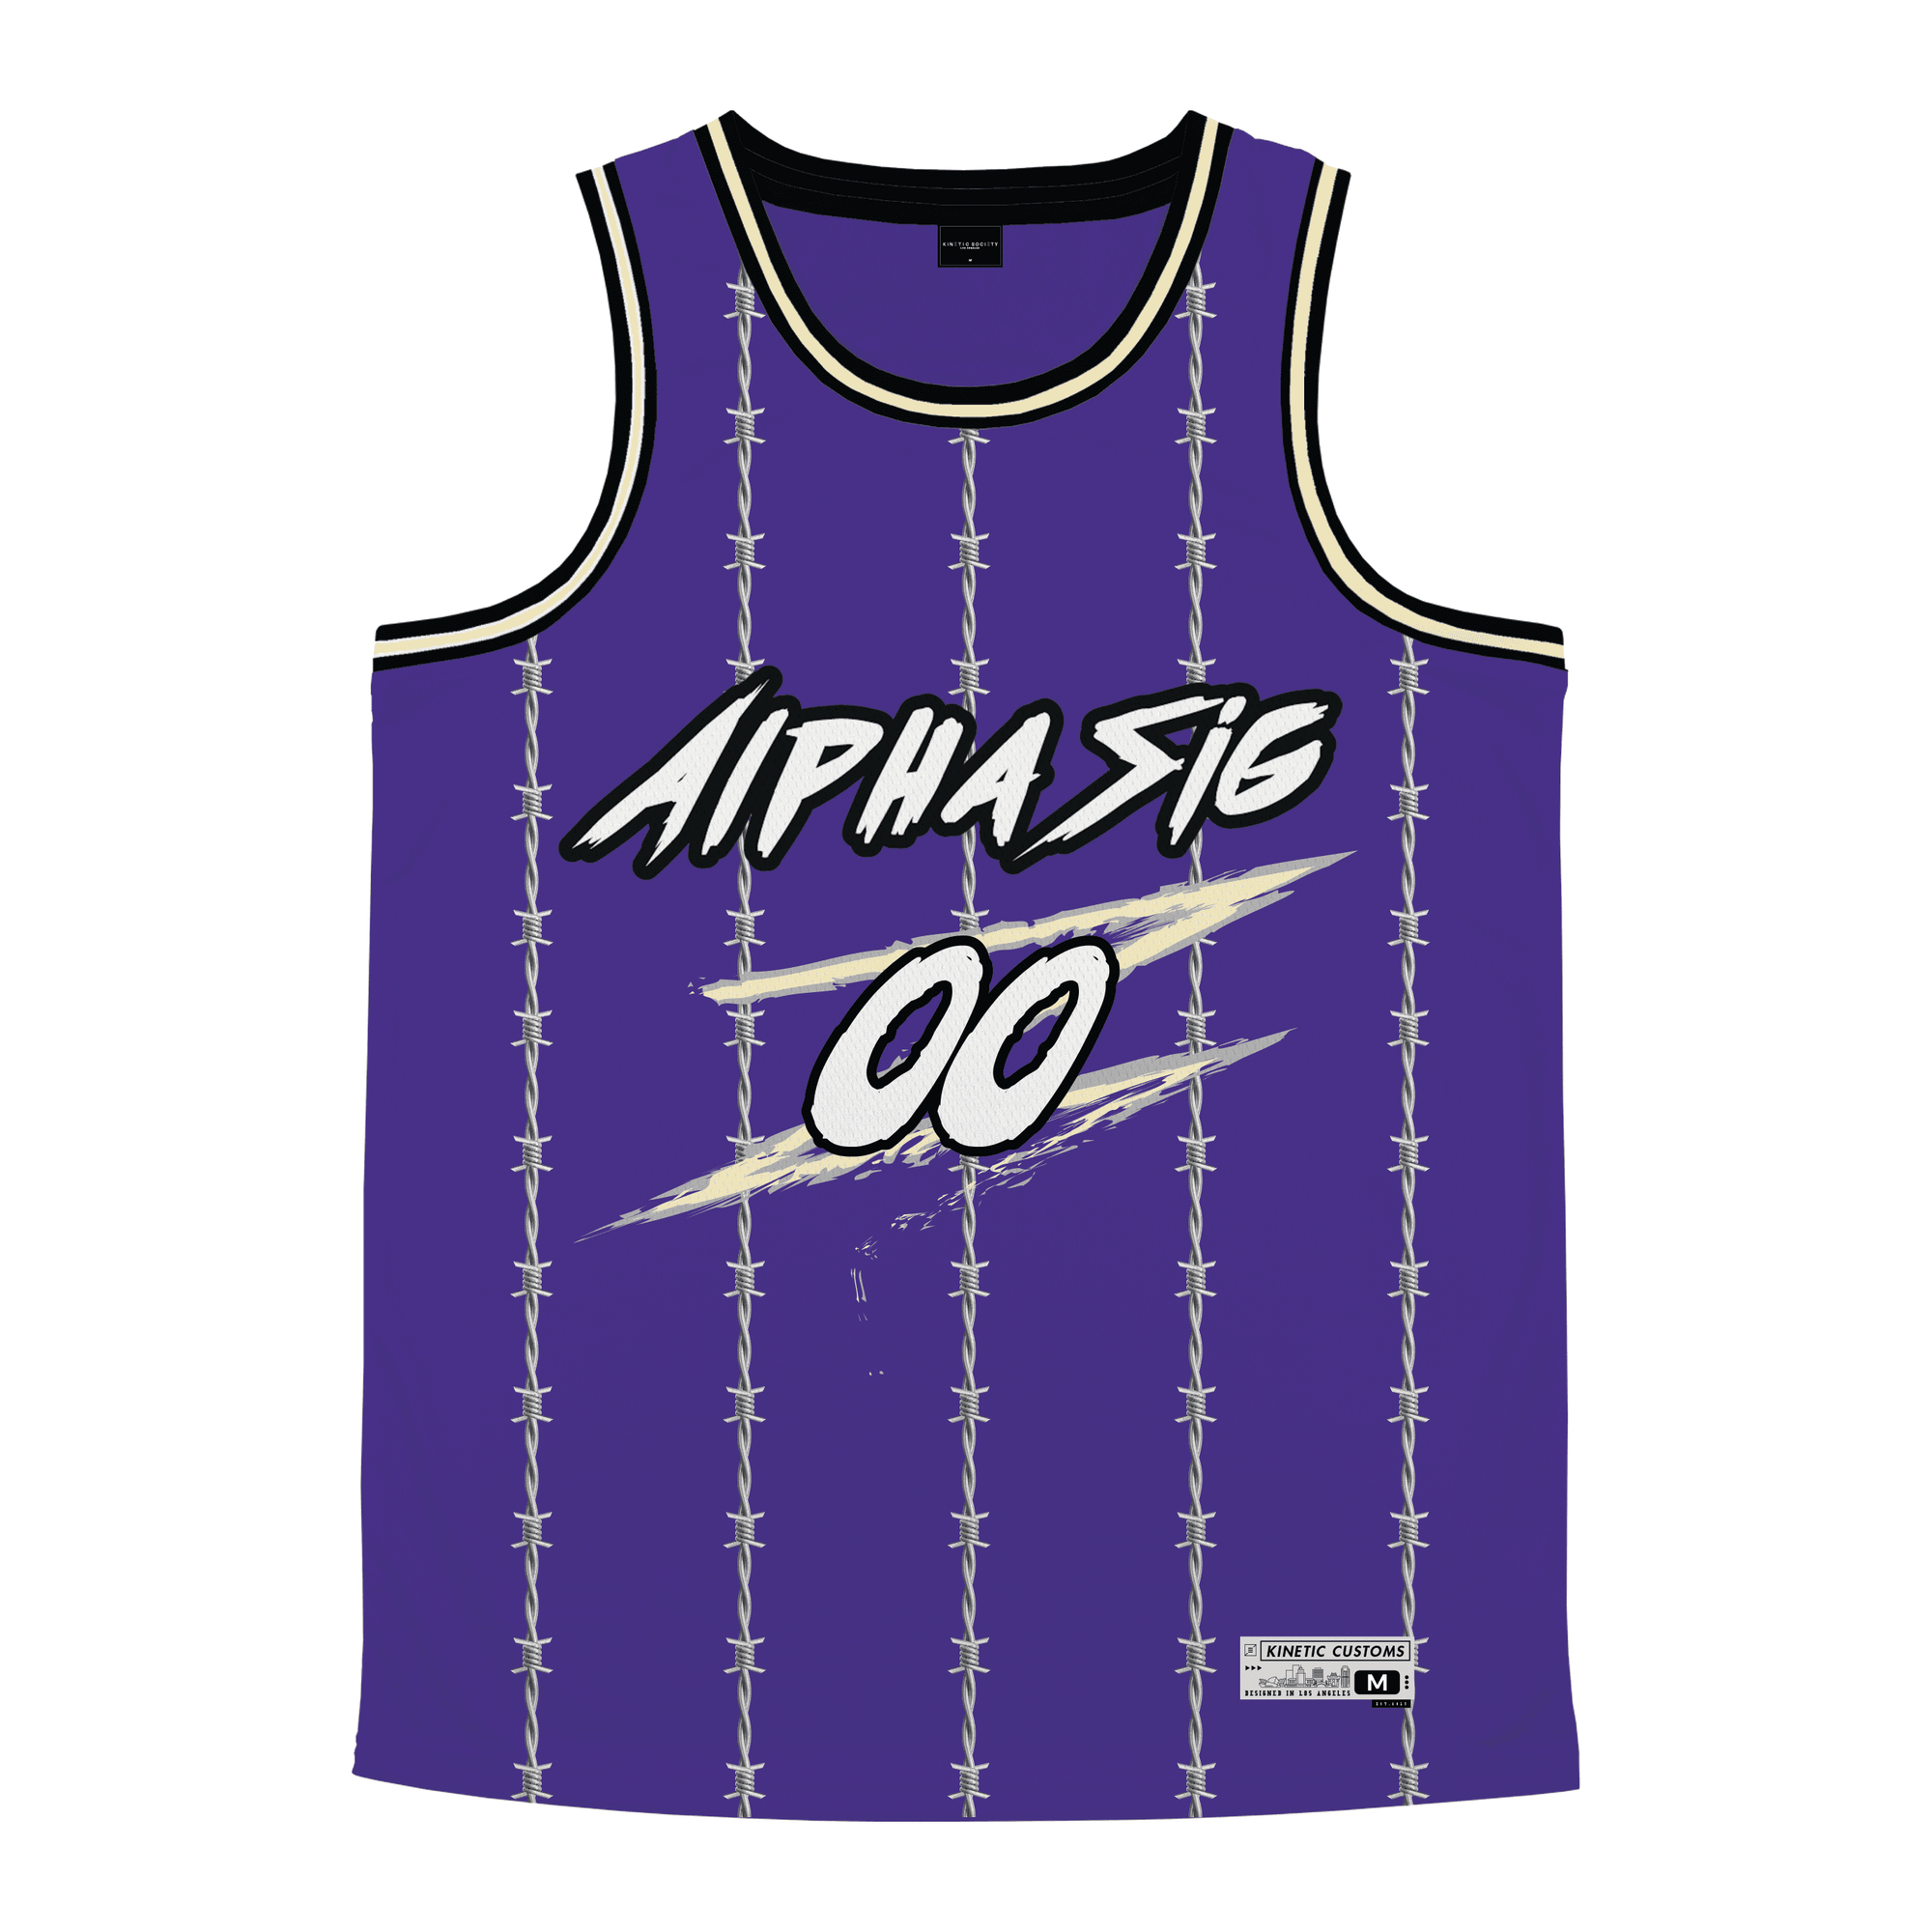 Alpha Sigma Phi - Barbed Wire Basketball Jersey